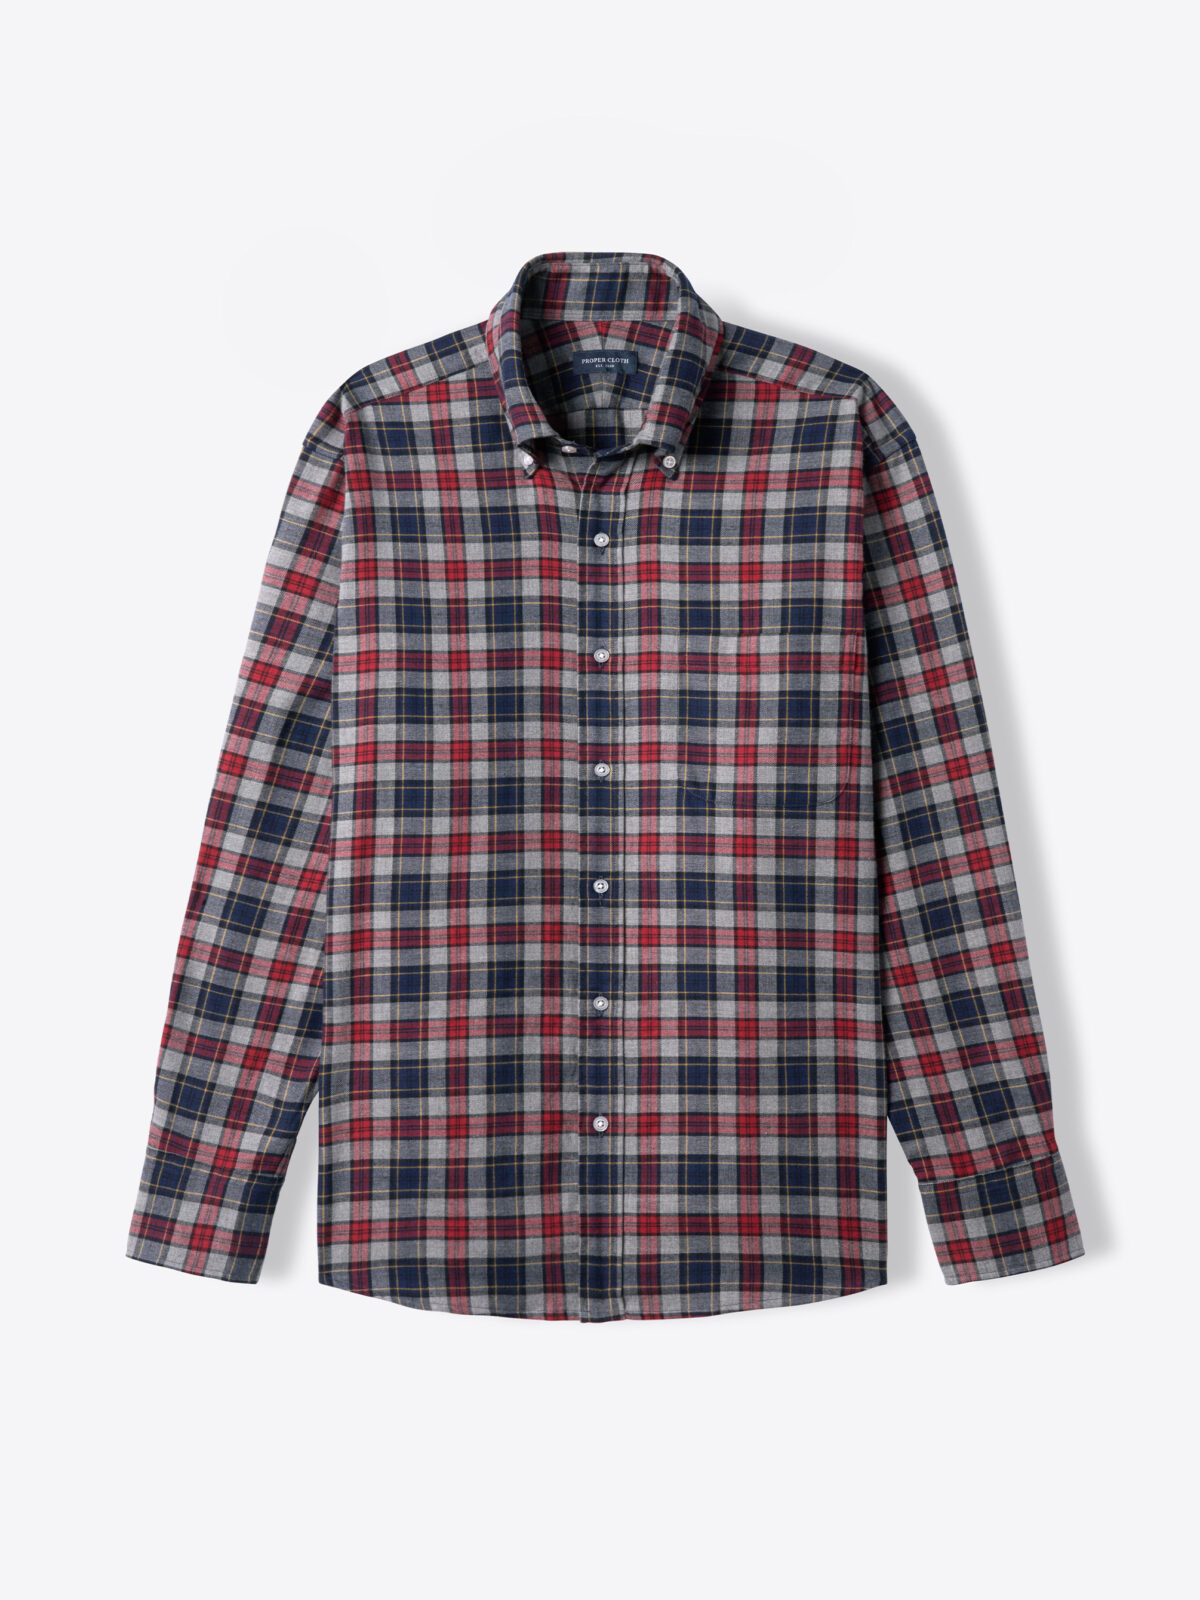 Stowe Red Navy and Grey Plaid Flannel Shirts by Proper Cloth